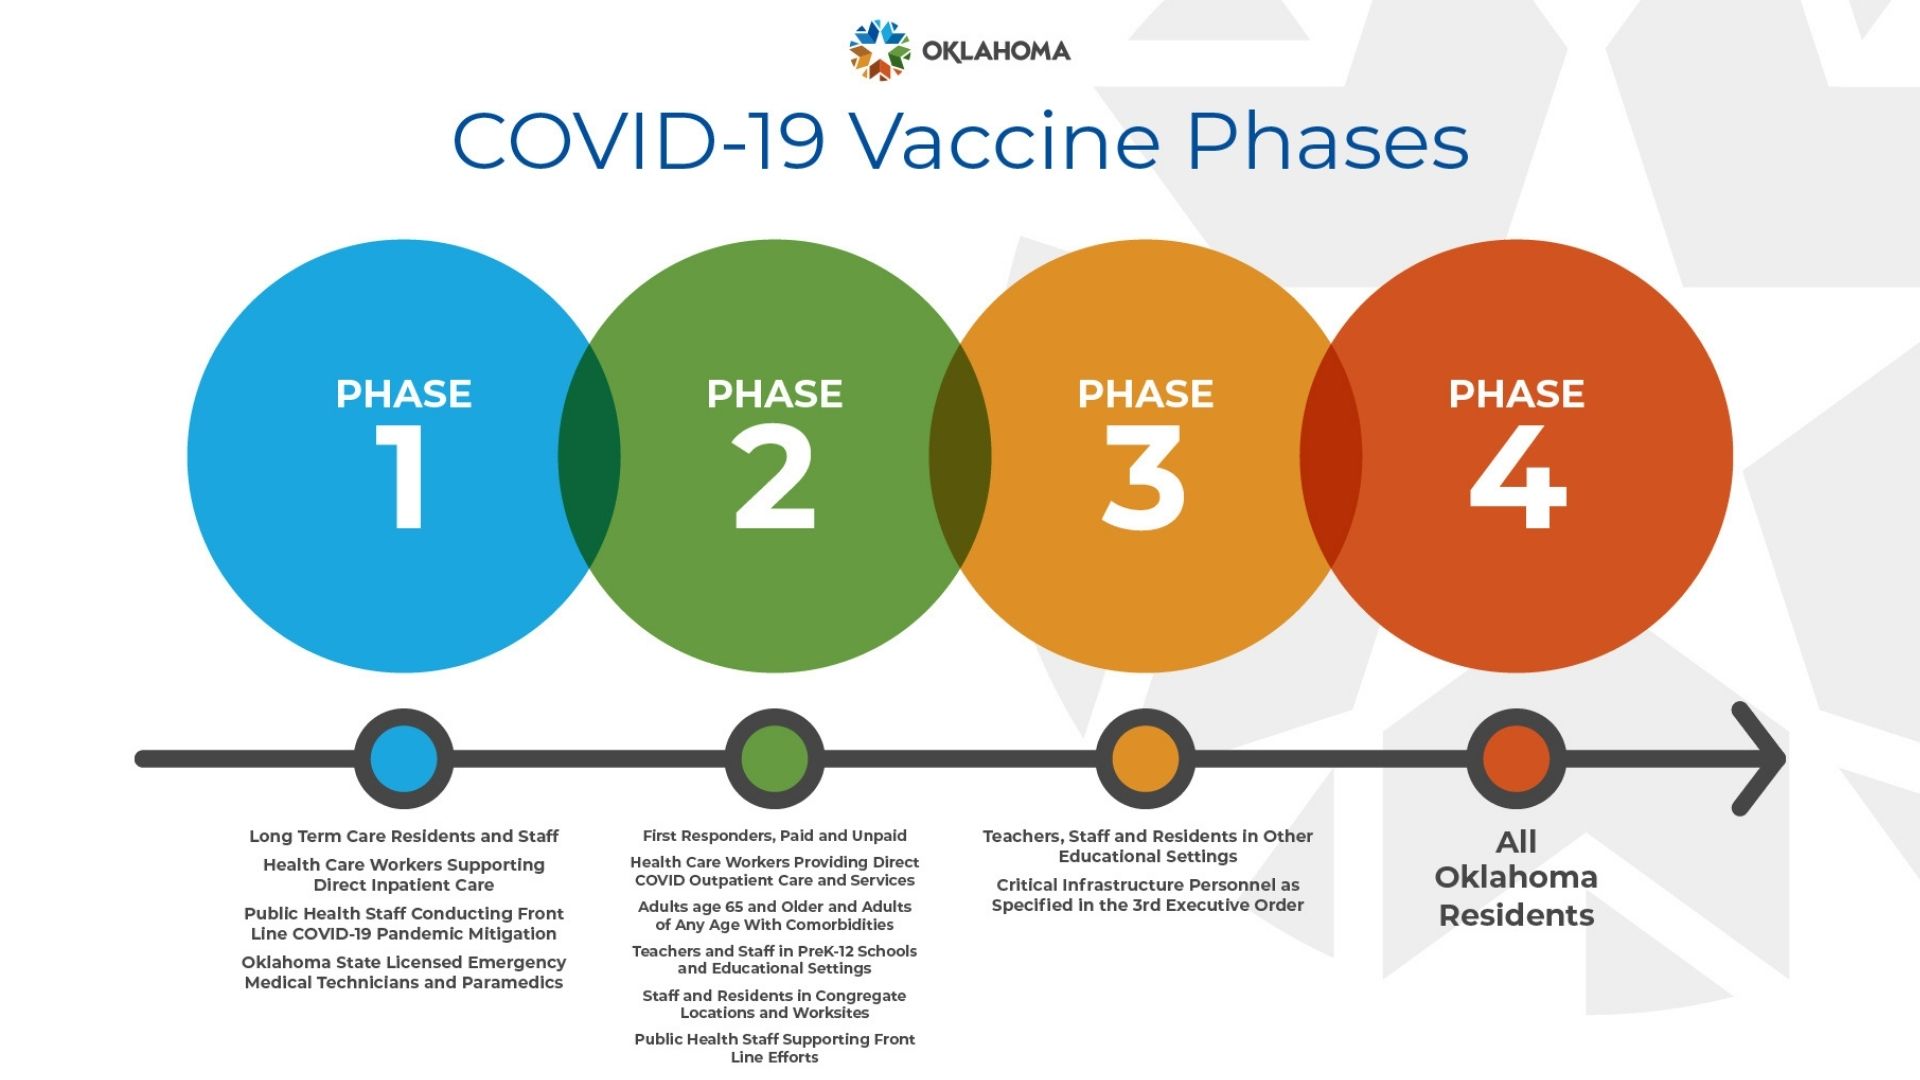 Oklahoma Department of Health's COVID-19 Vaccine Phases